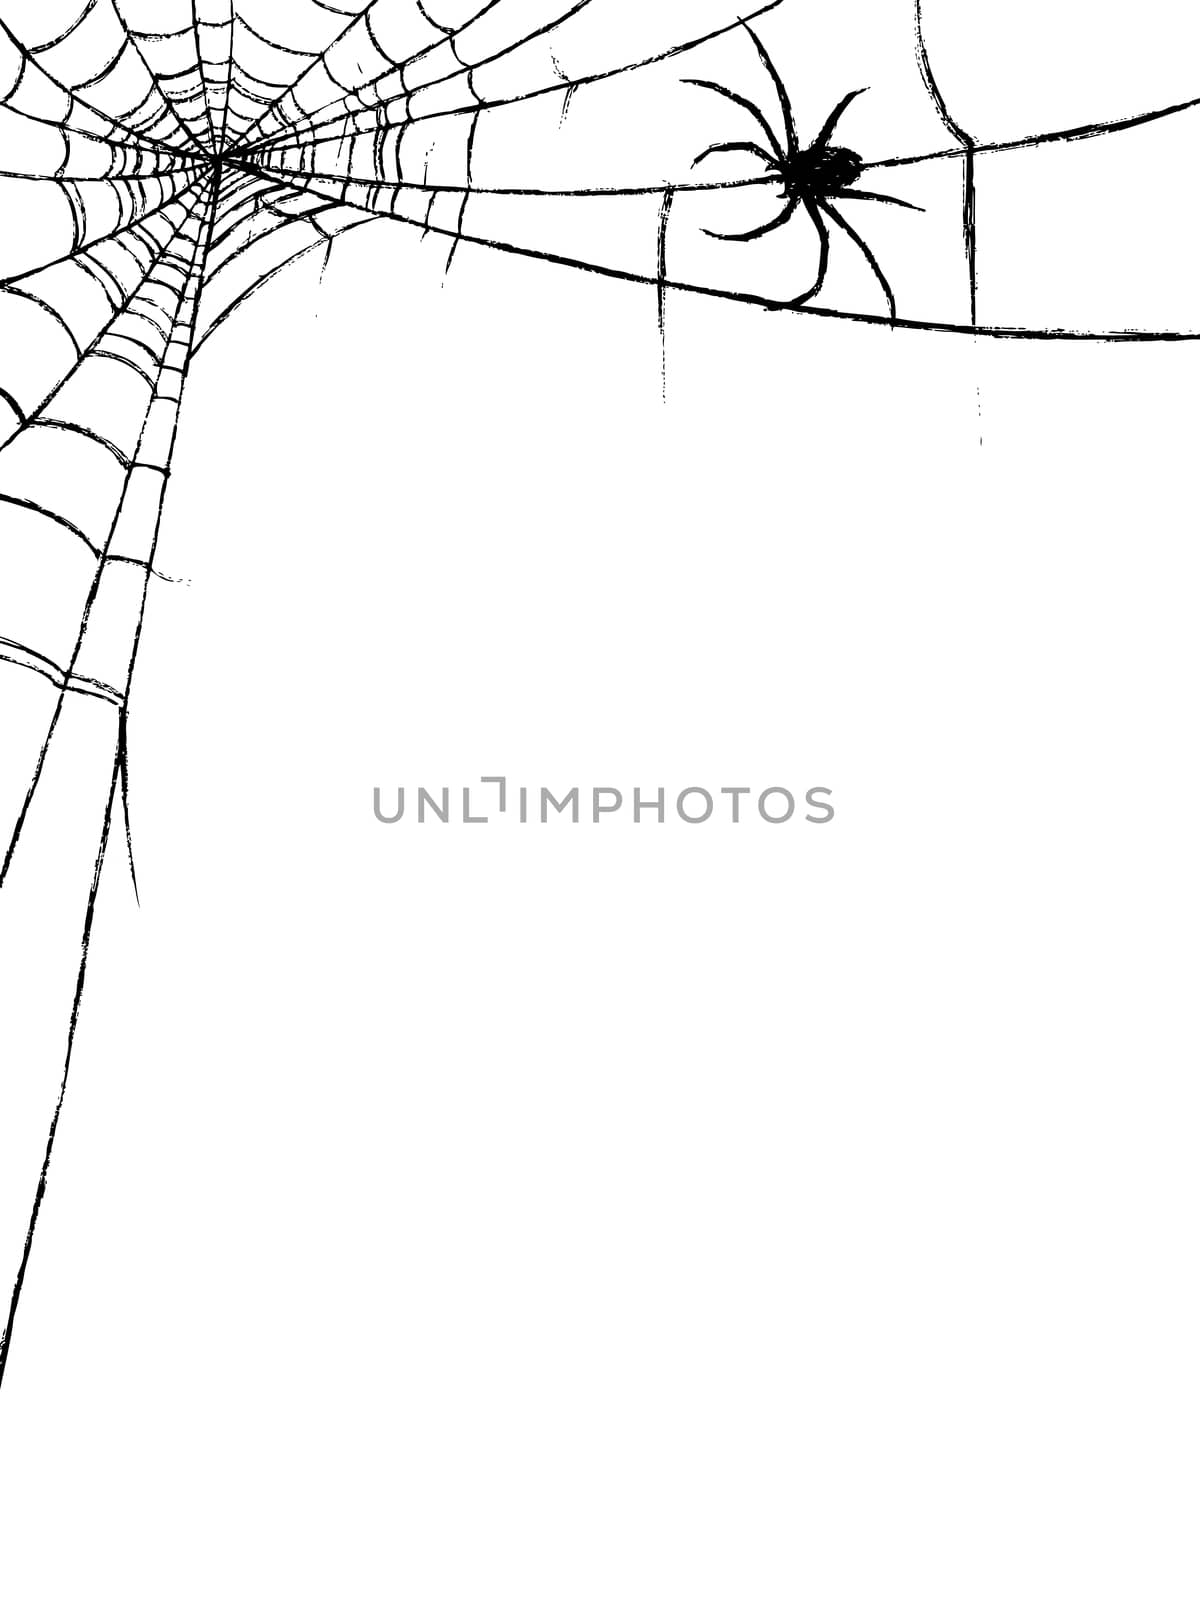 spider and spiderweb by simpleBE